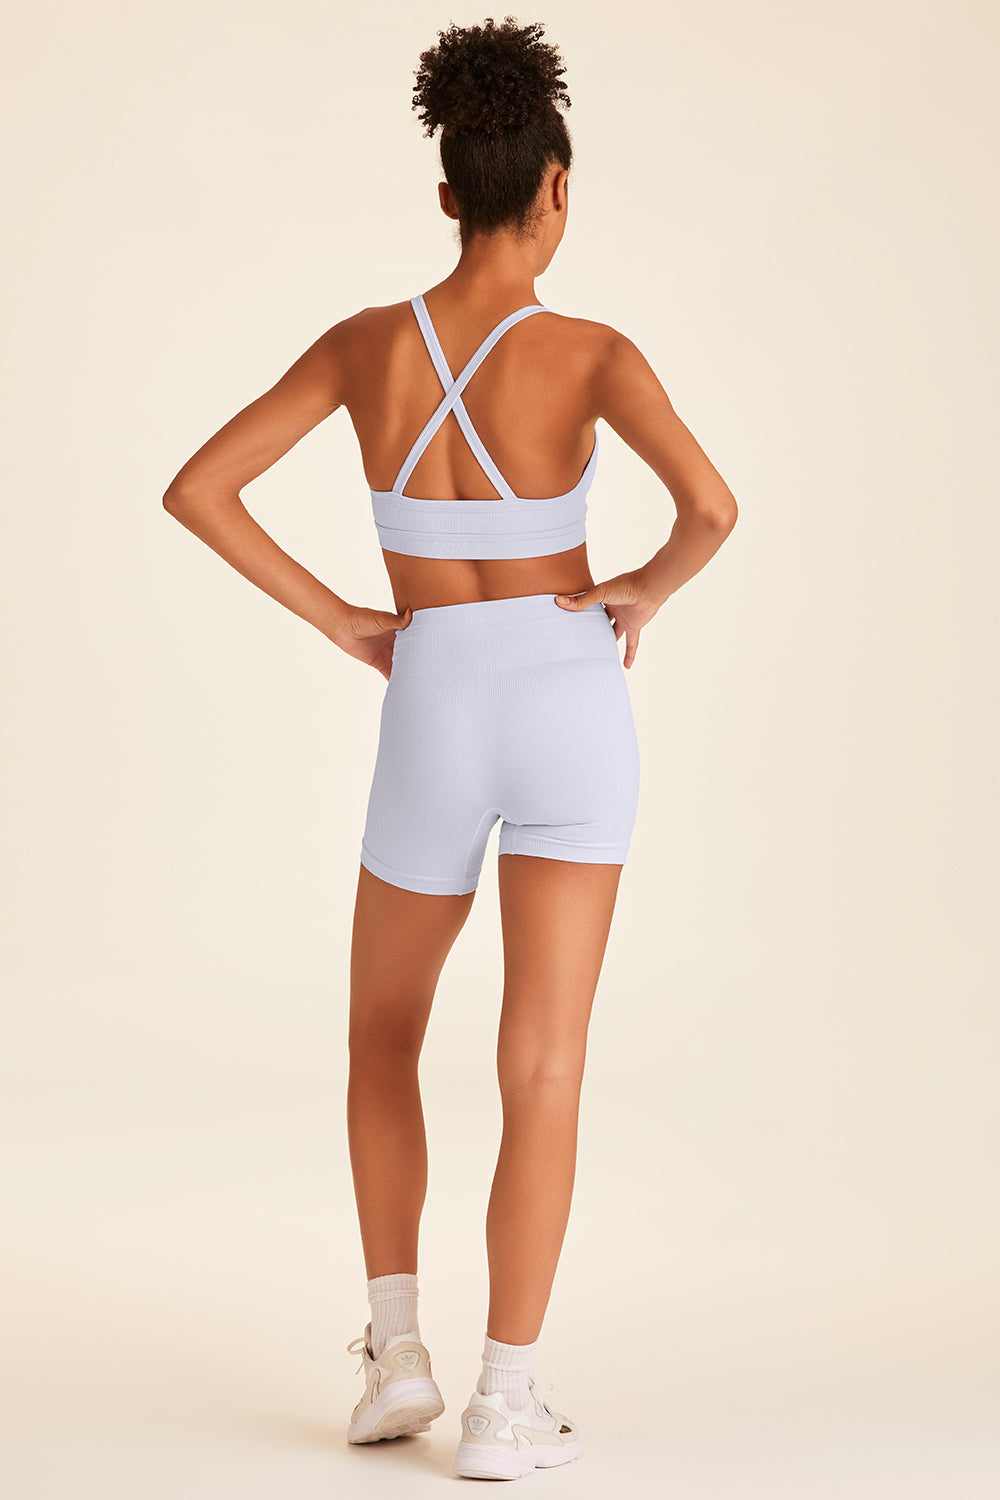 Alala Barre Seamless Short in Baby Blue for women